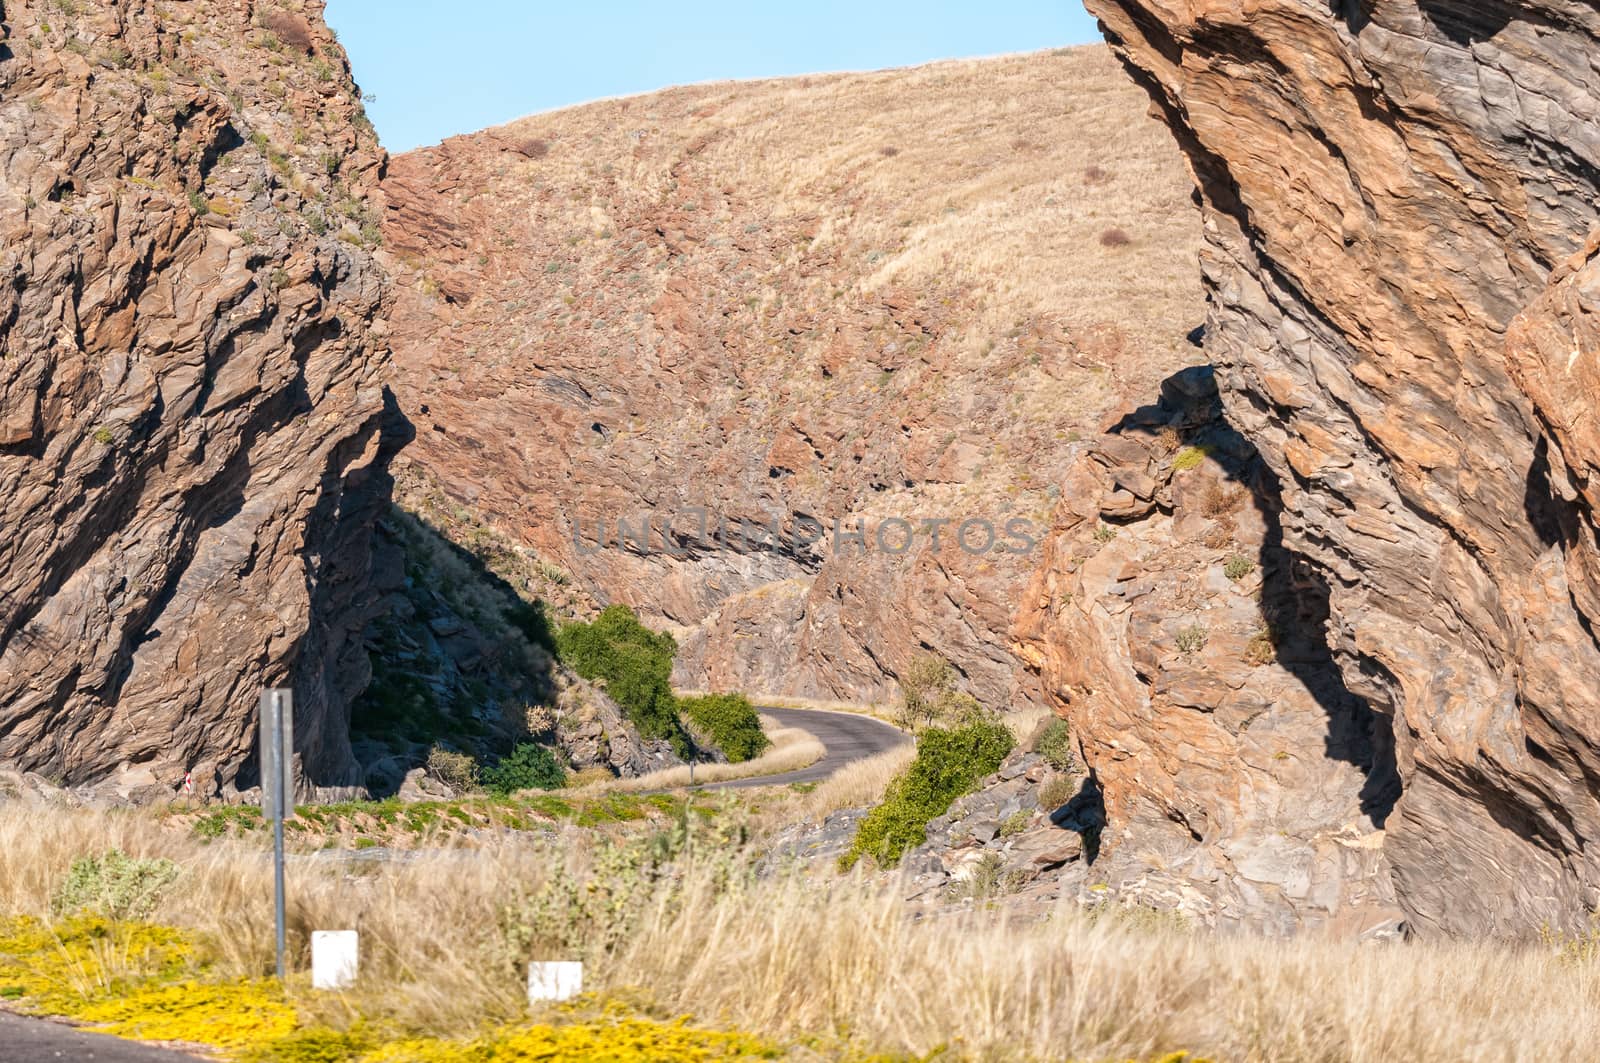 View of the Kuiseb Pass and Kuiseb Canyon on road C14 in Namibia